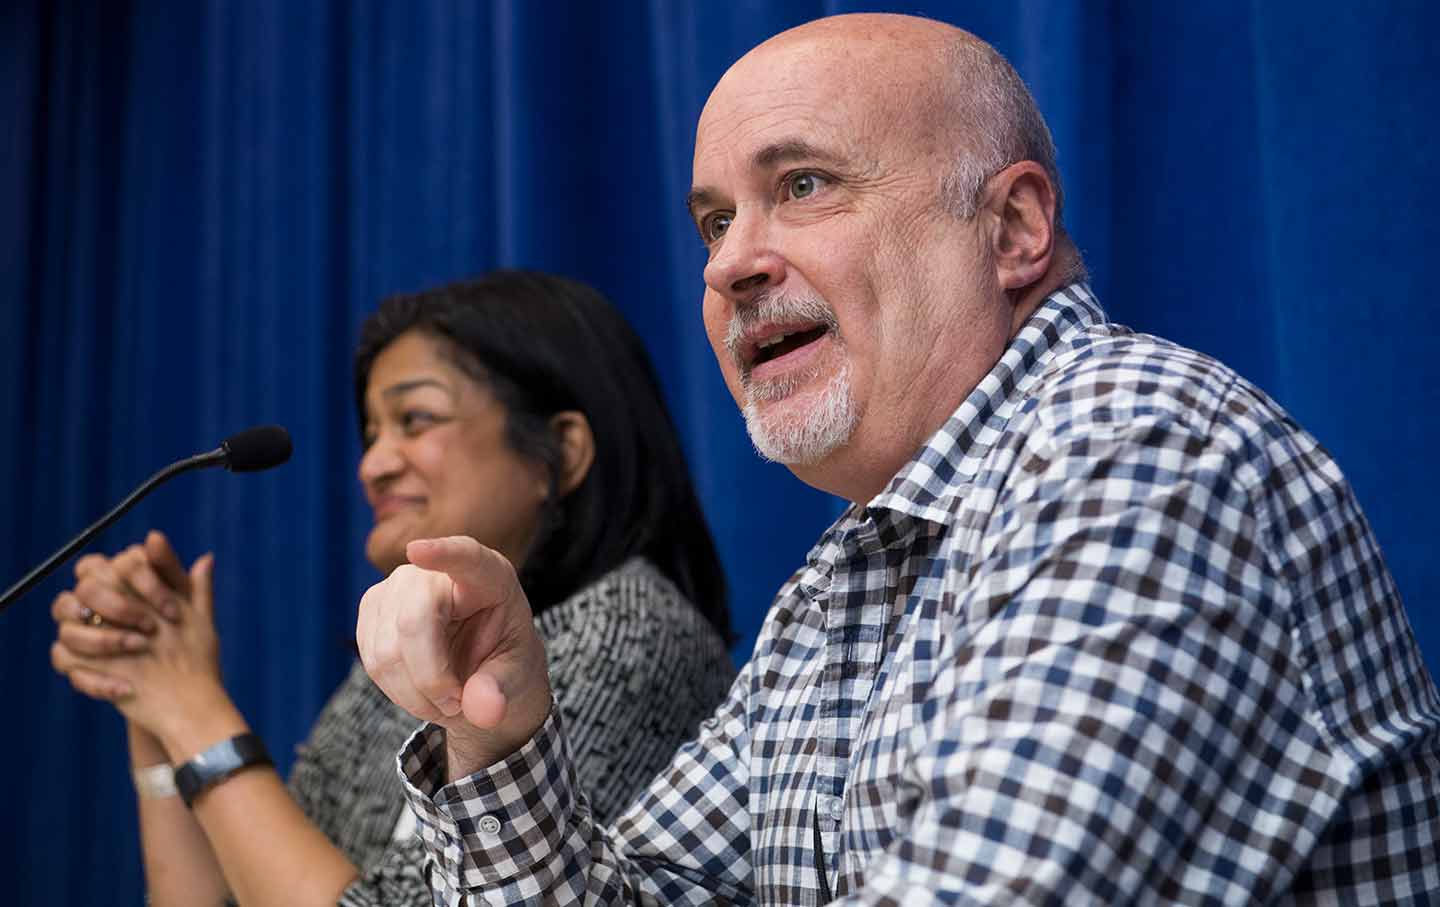 Mark Pocan Makes the Case That Sanders Is the Electable Candidate